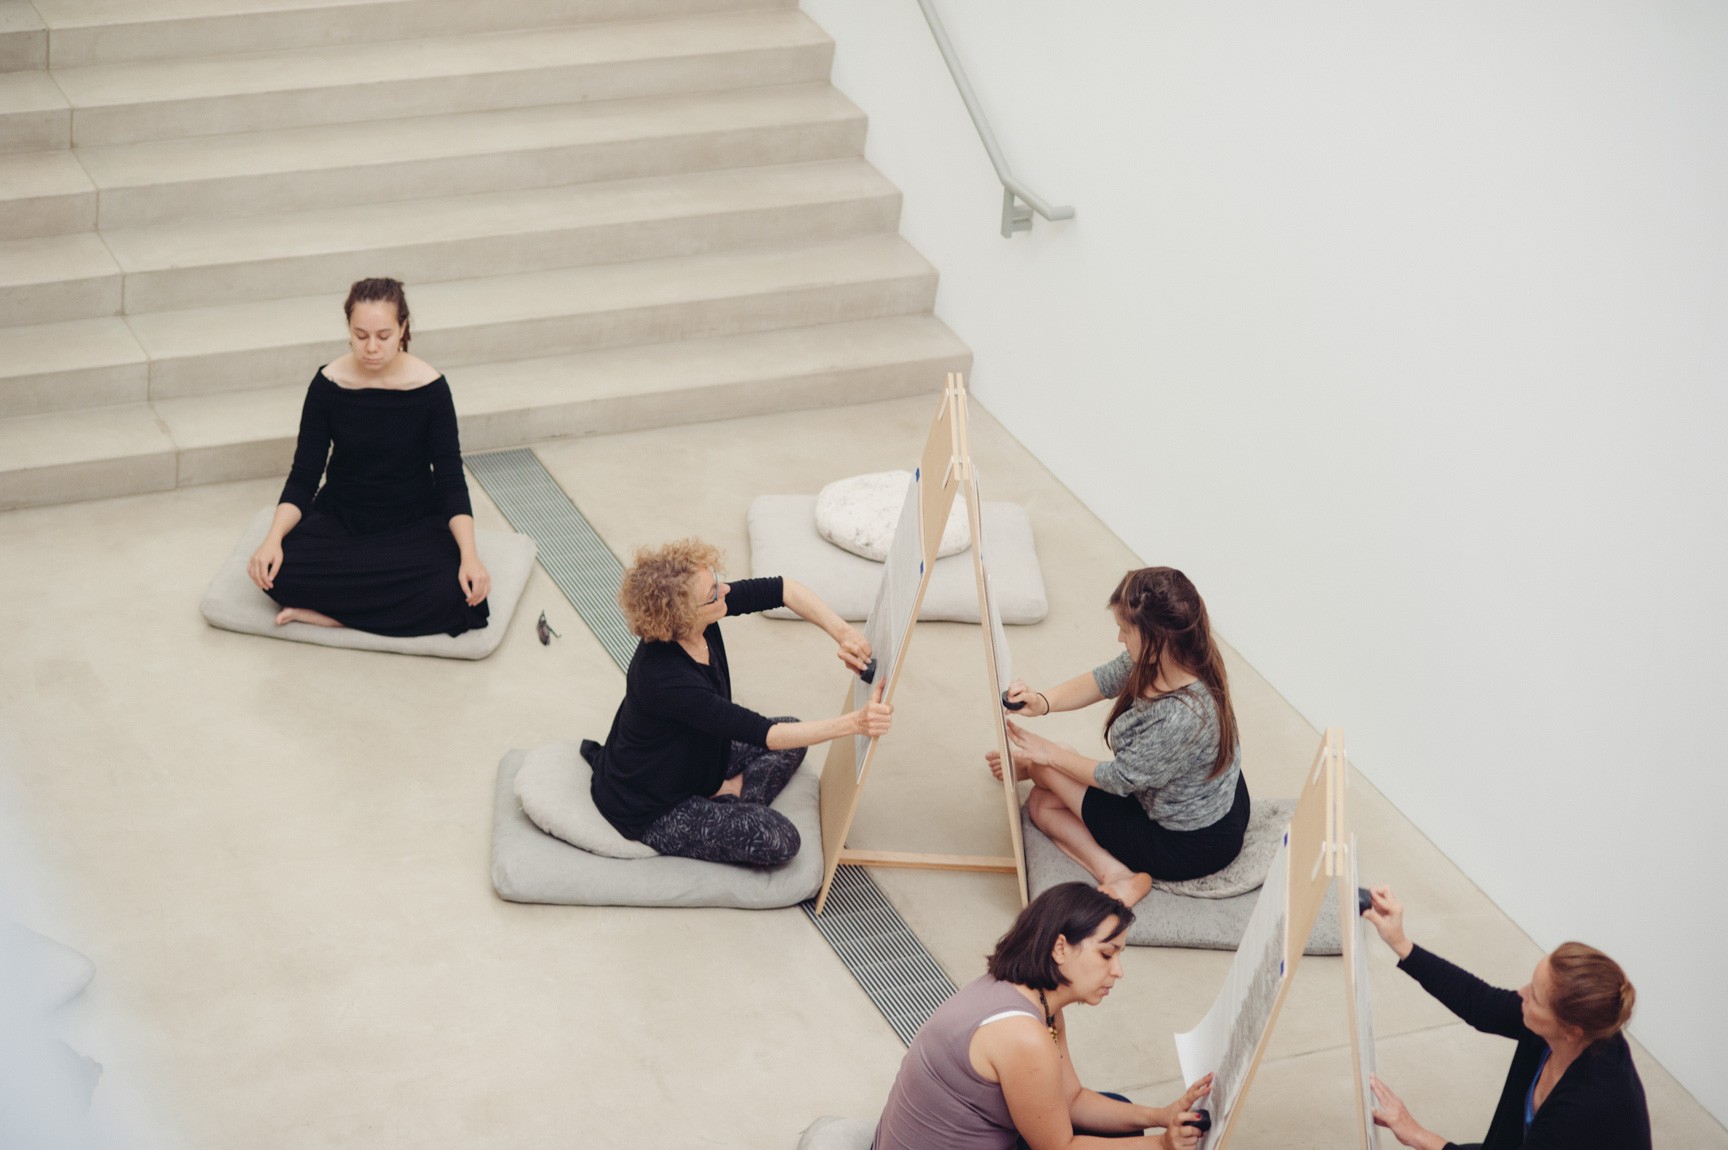 Participants sit on cushions and draw on either sides of a triangular easel in the Lower-Main Gallery. Another meditates cross-legged on a cushion at the foot of the Main Staircase.